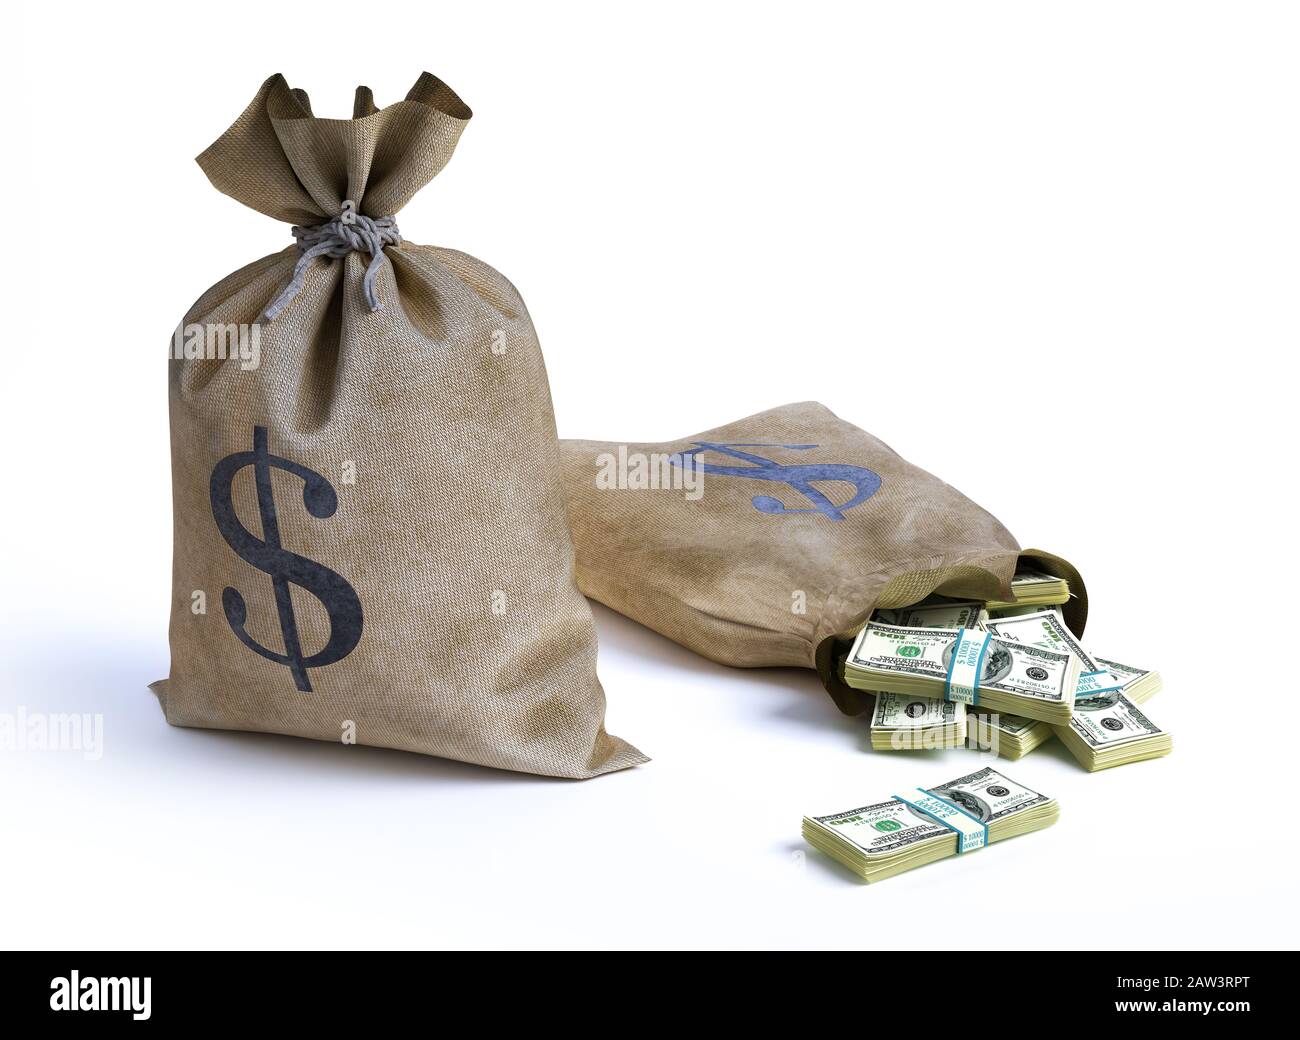 Money bags with wads of banknotes coming out from one of them. 3D illustration. On white background. Stock Photo